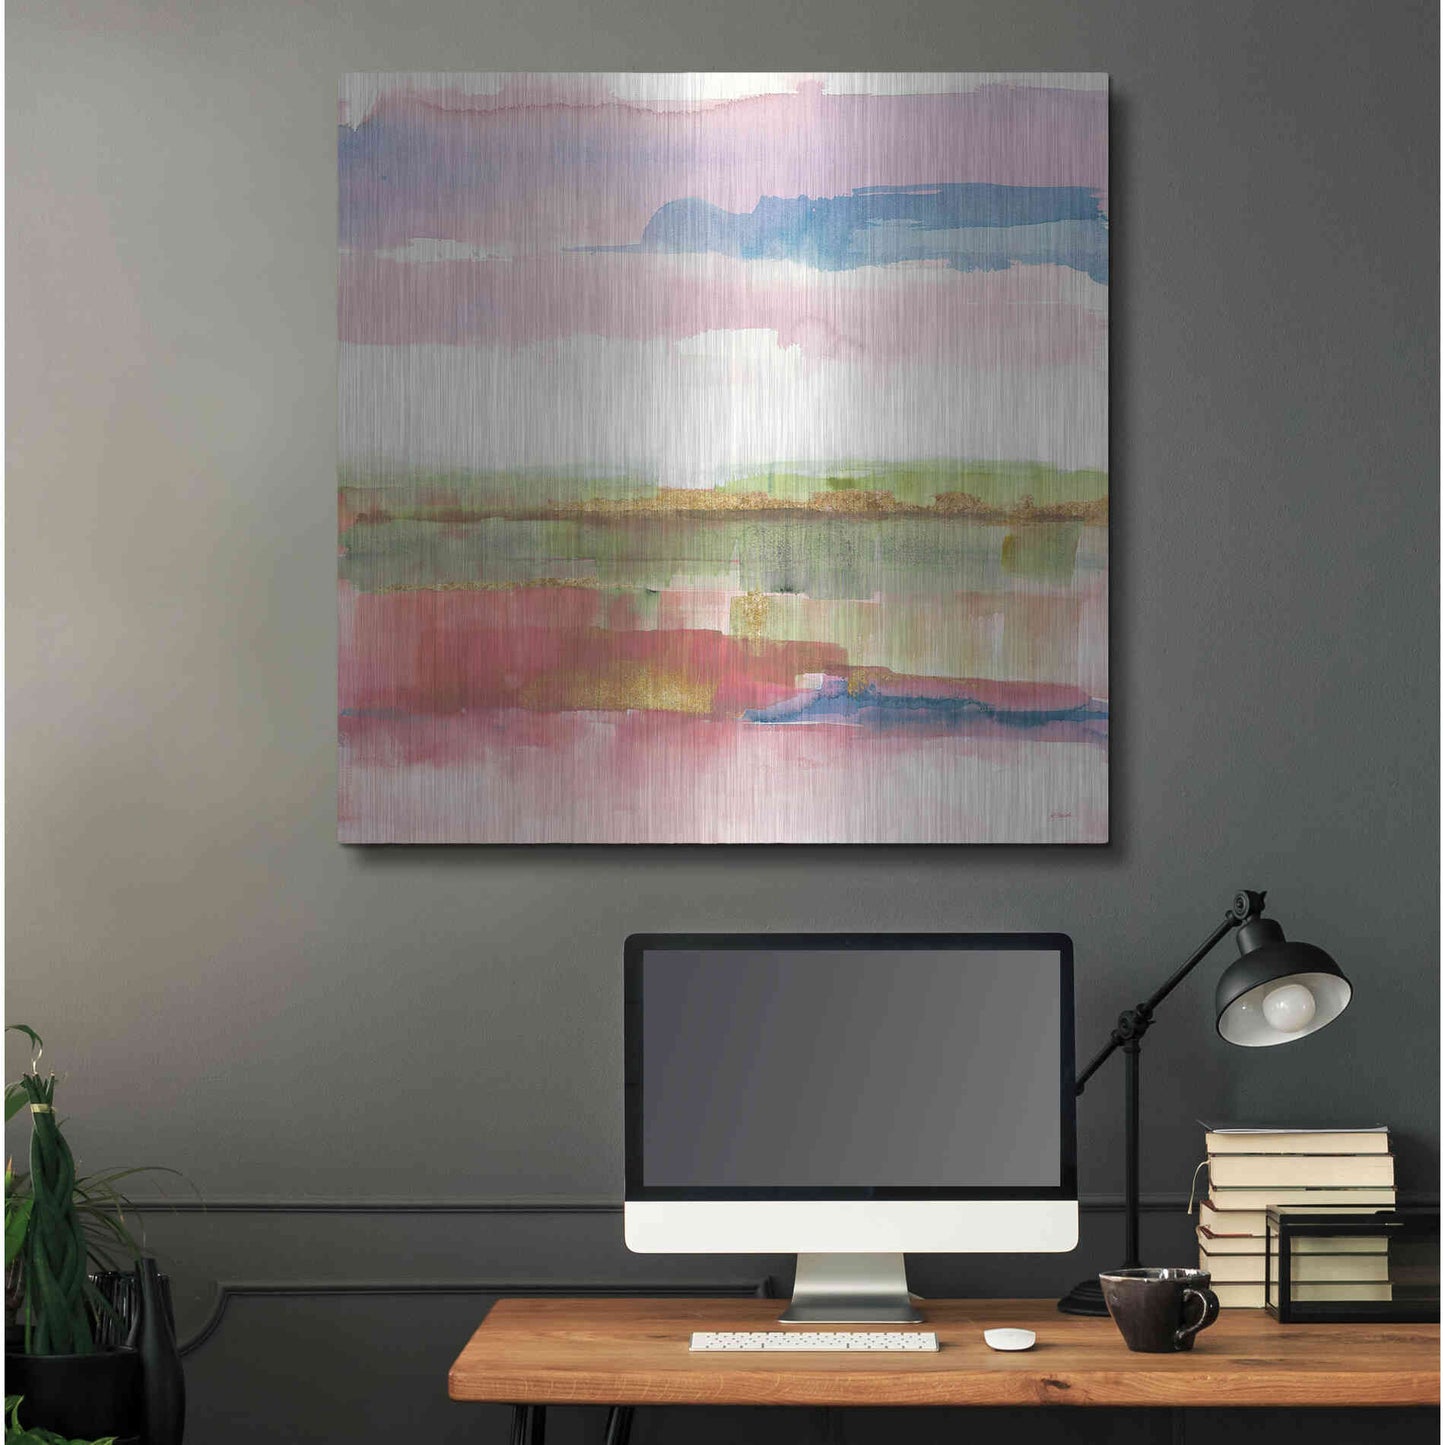 Luxe Metal Art 'Influence Of Line And Color Gold Bright' by Mike Schick, Metal Wall Art,36x36